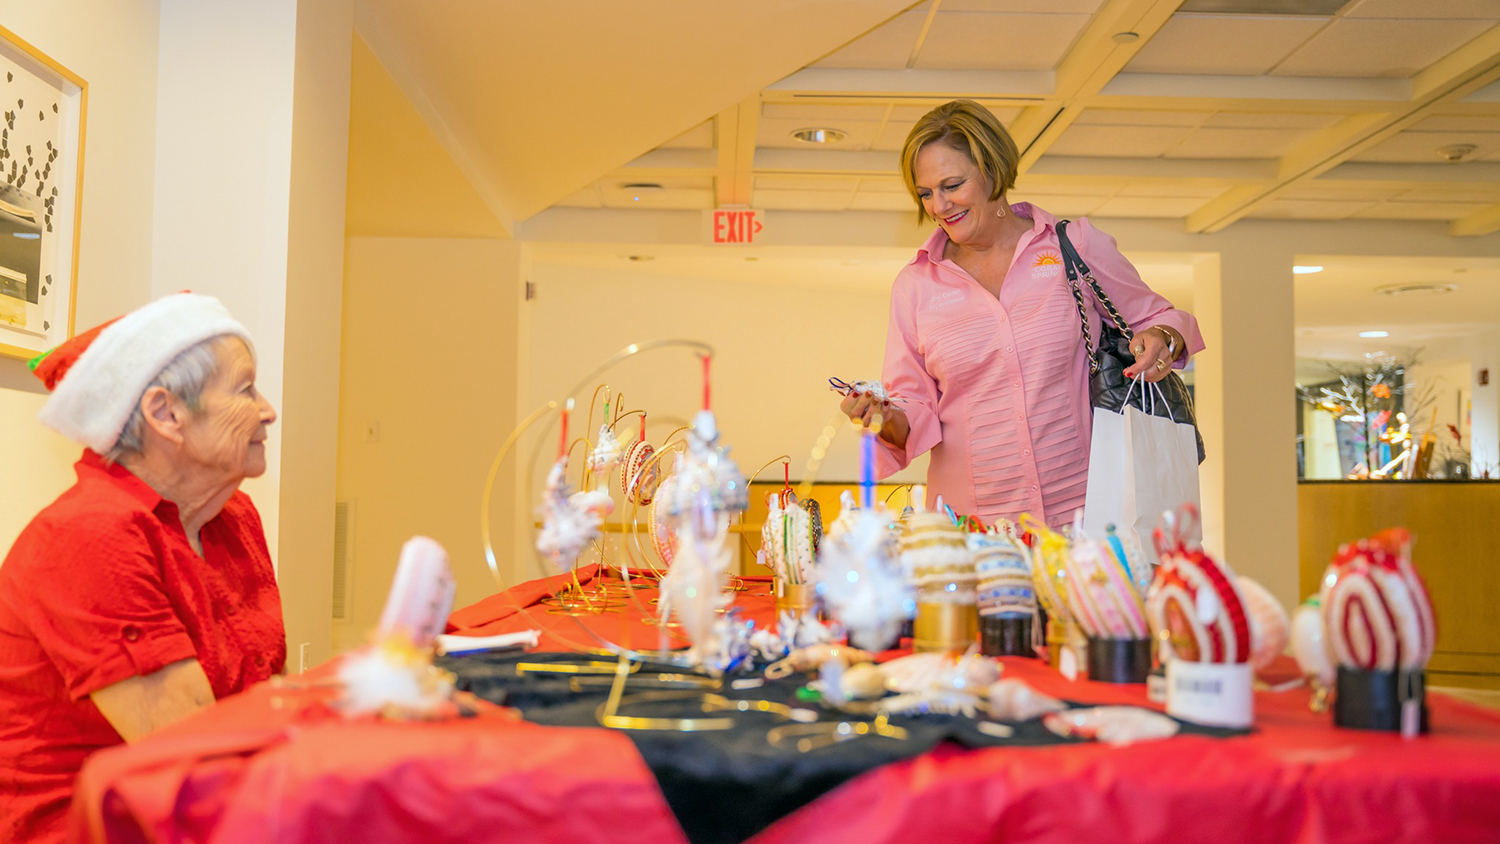 Pine and Palm Holiday Market Comes to Coral Springs Museum Dec. 10 - 11